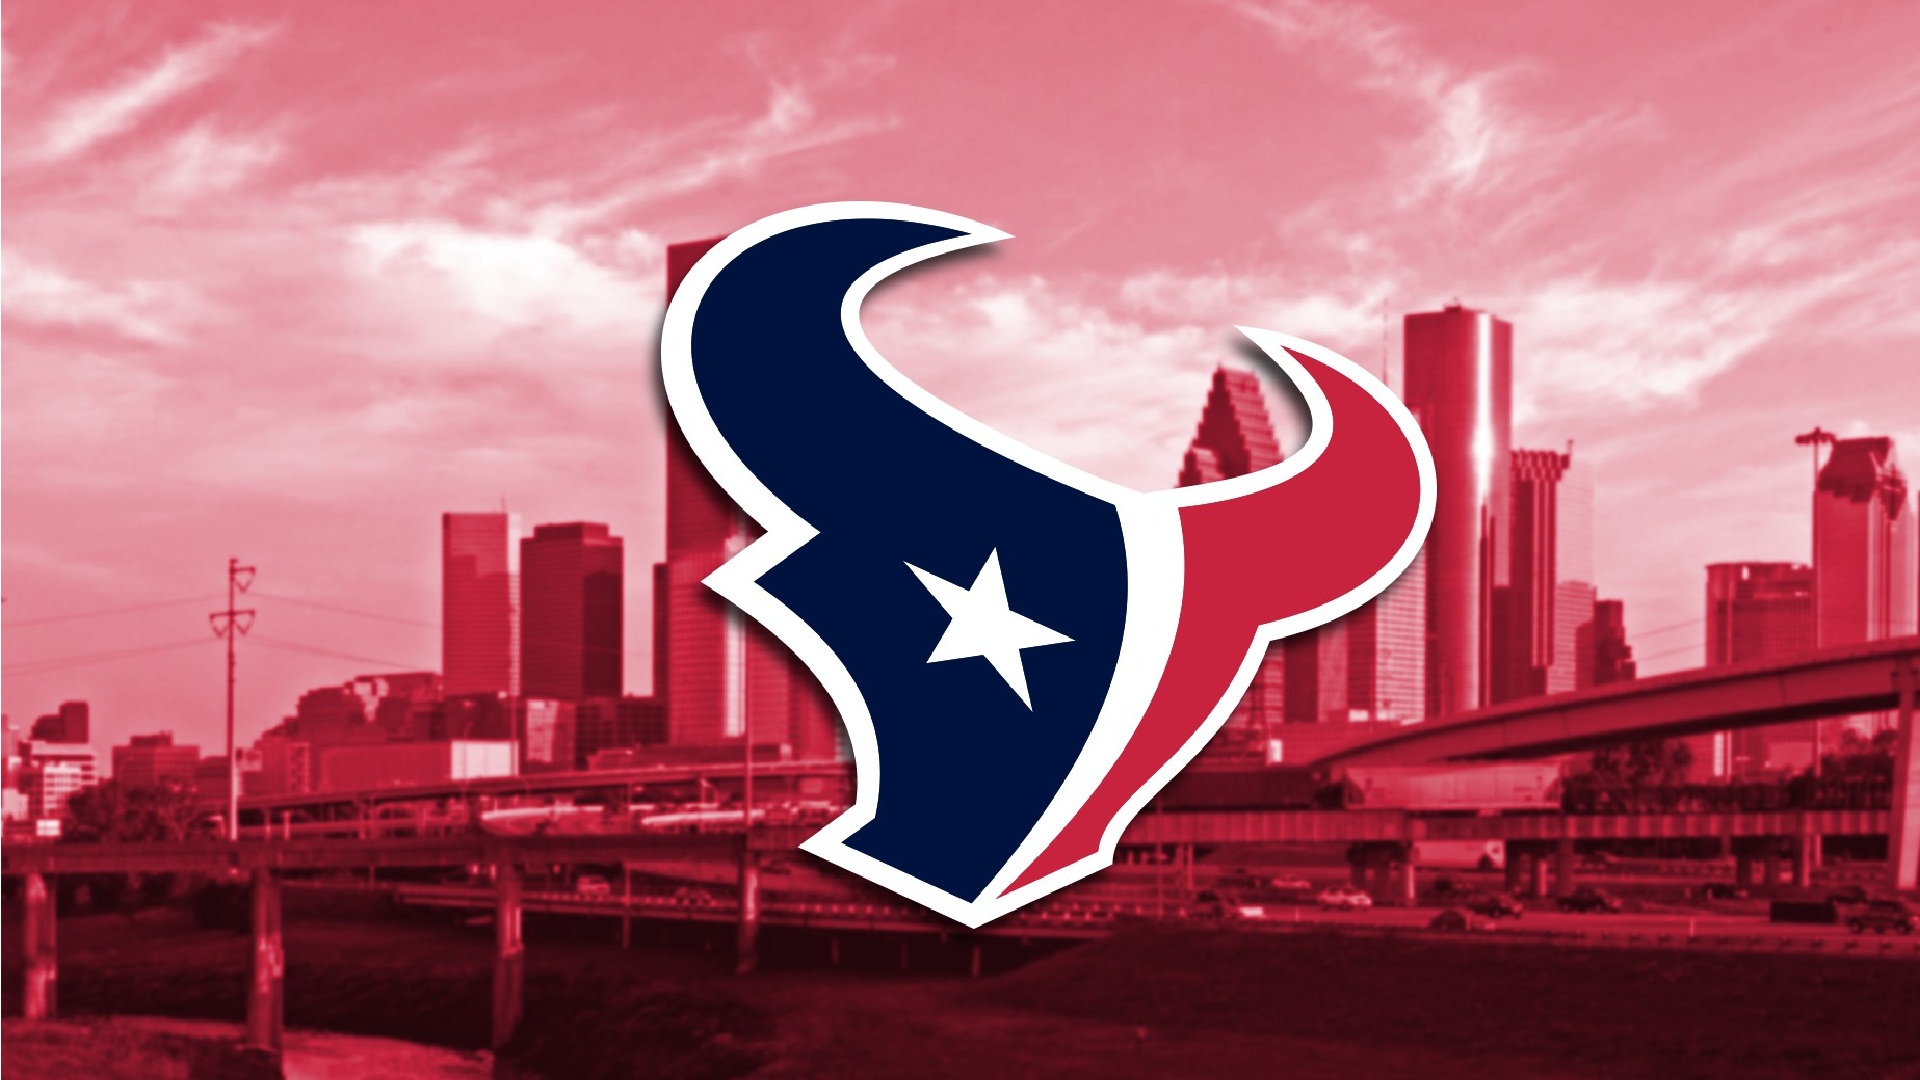 HD Desktop Wallpaper Houston Texans NFL with resolution 1920x1080 pixel. You can make this wallpaper for your Mac or Windows Desktop Background, iPhone, Android or Tablet and another Smartphone device